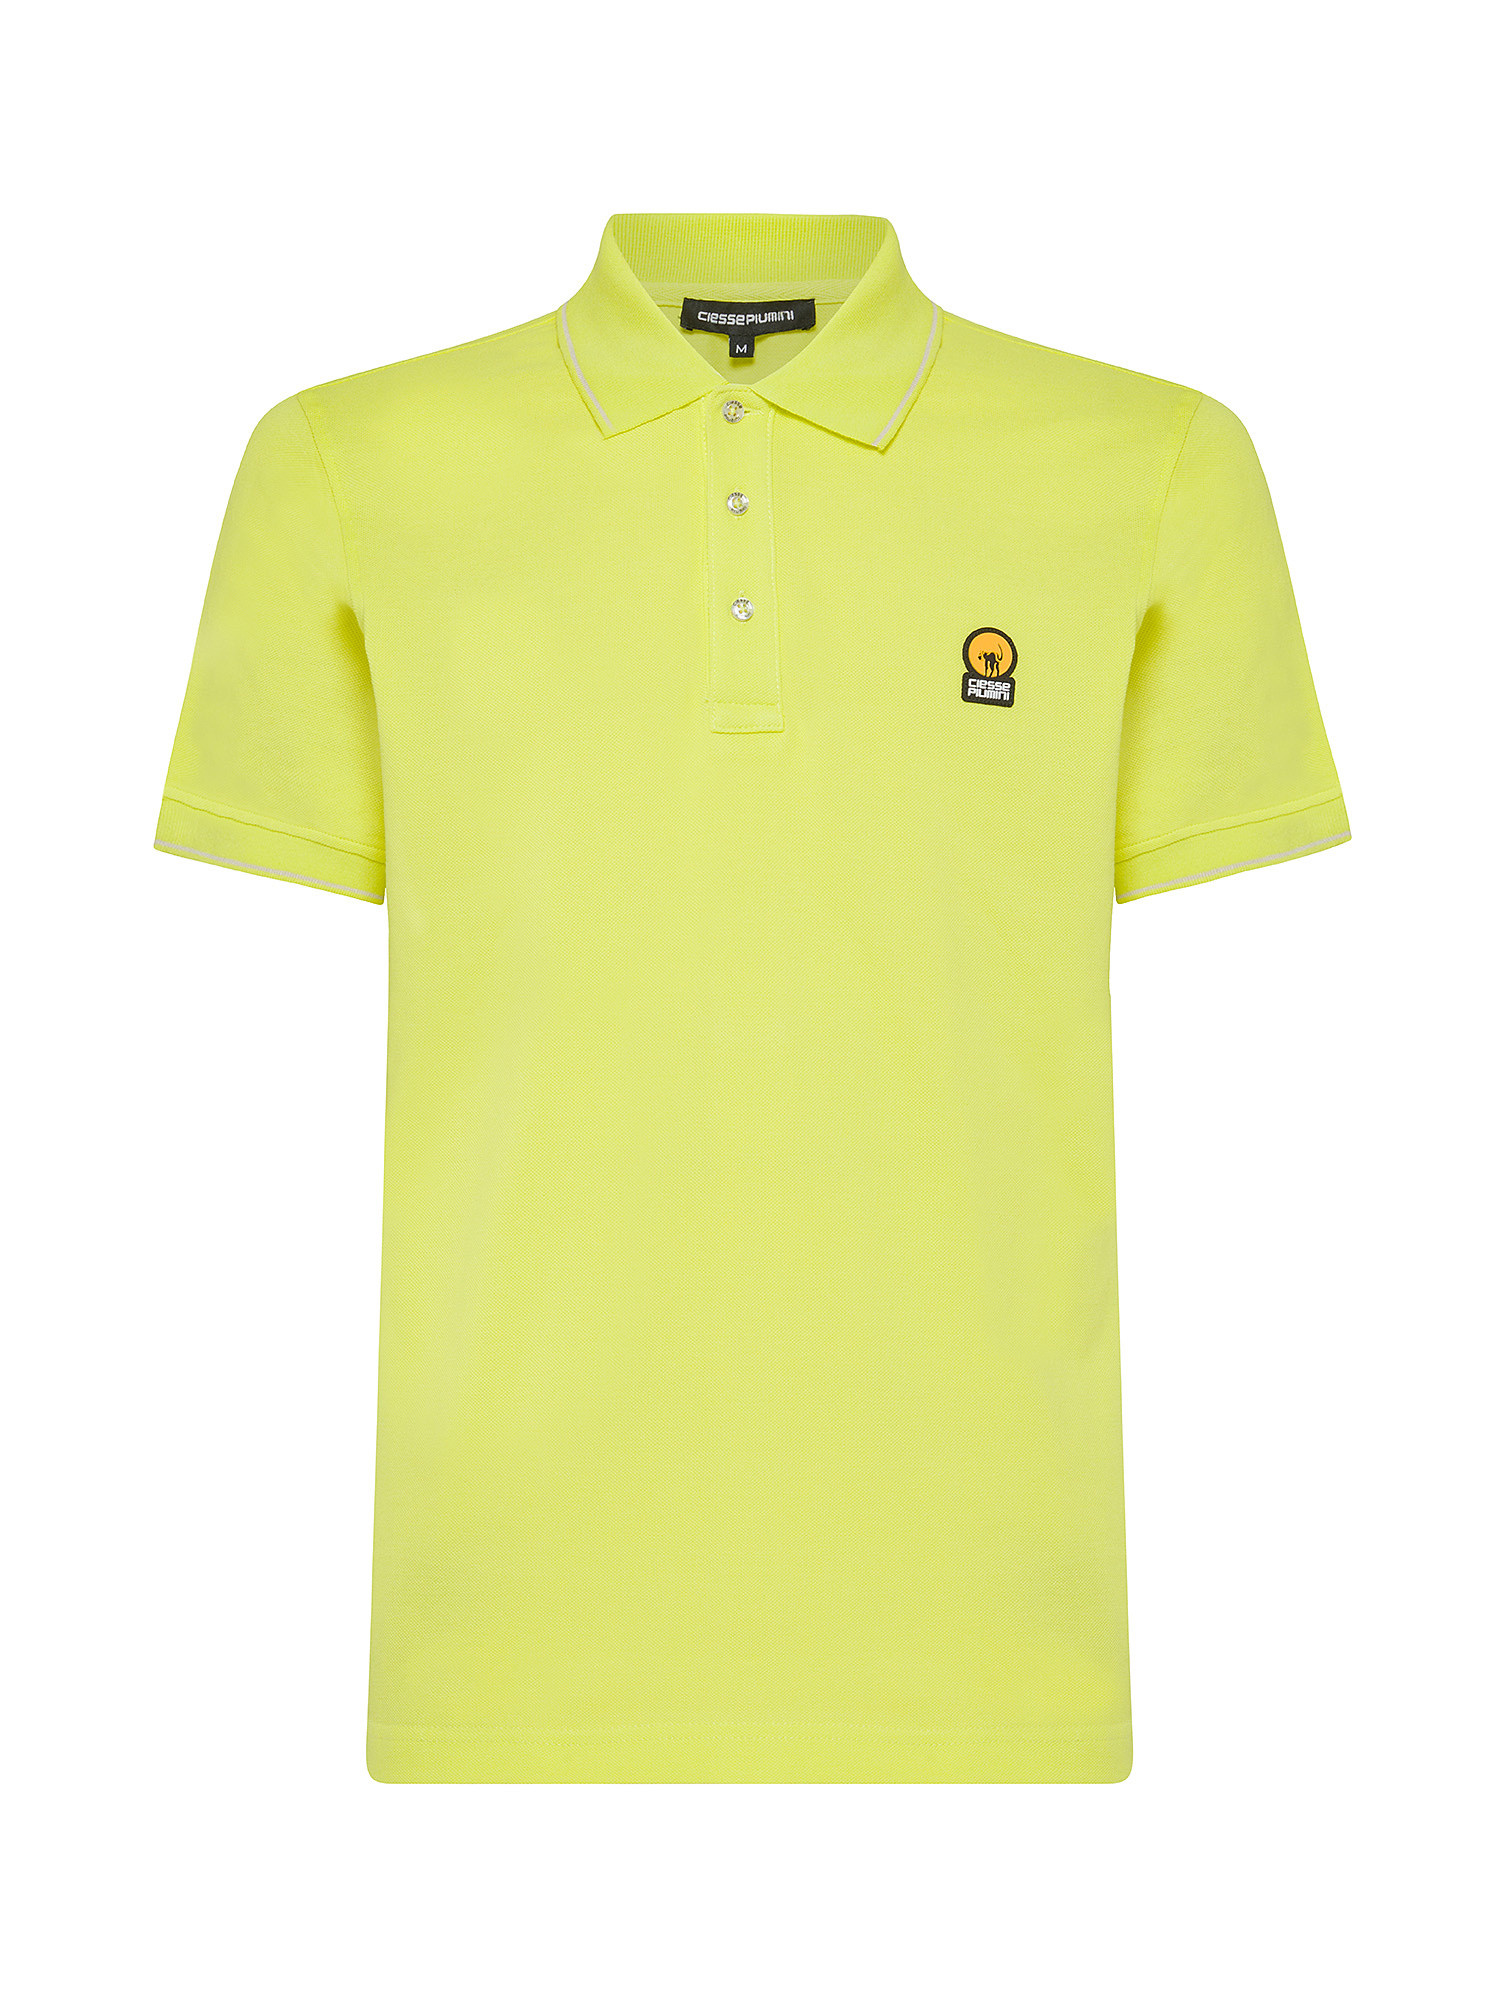 Ciesse Piumini - Piff polo shirt in cotton with logo, Yellow, large image number 0